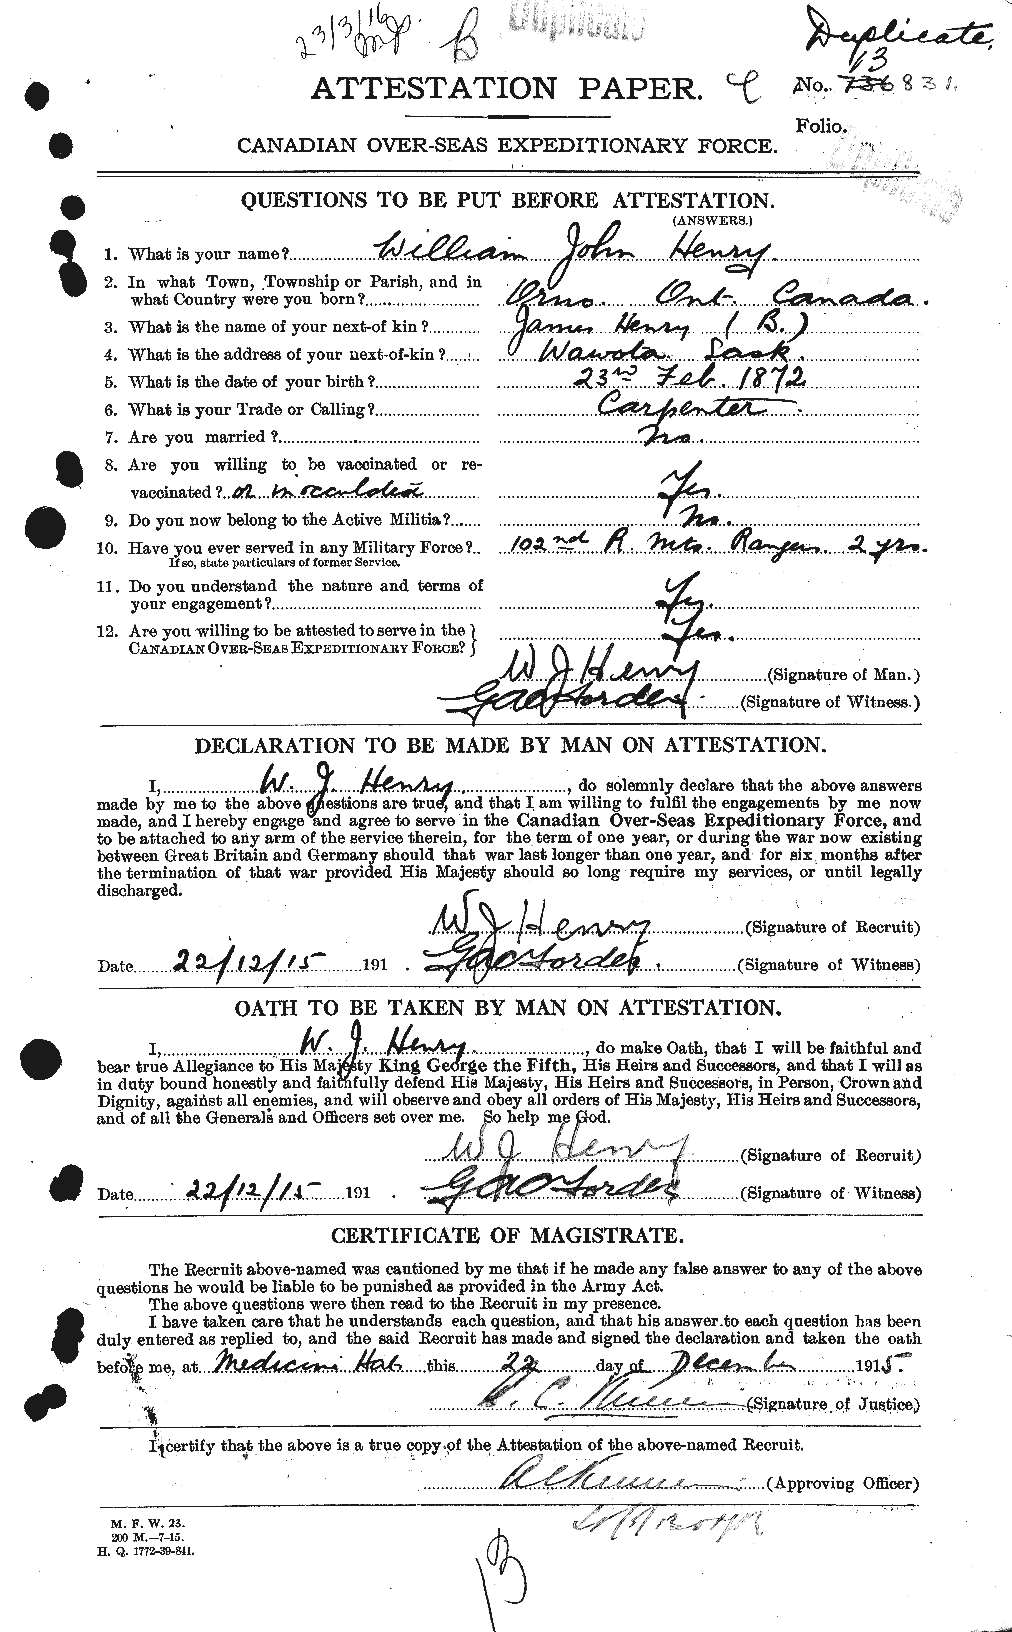 Personnel Records of the First World War - CEF 387788a